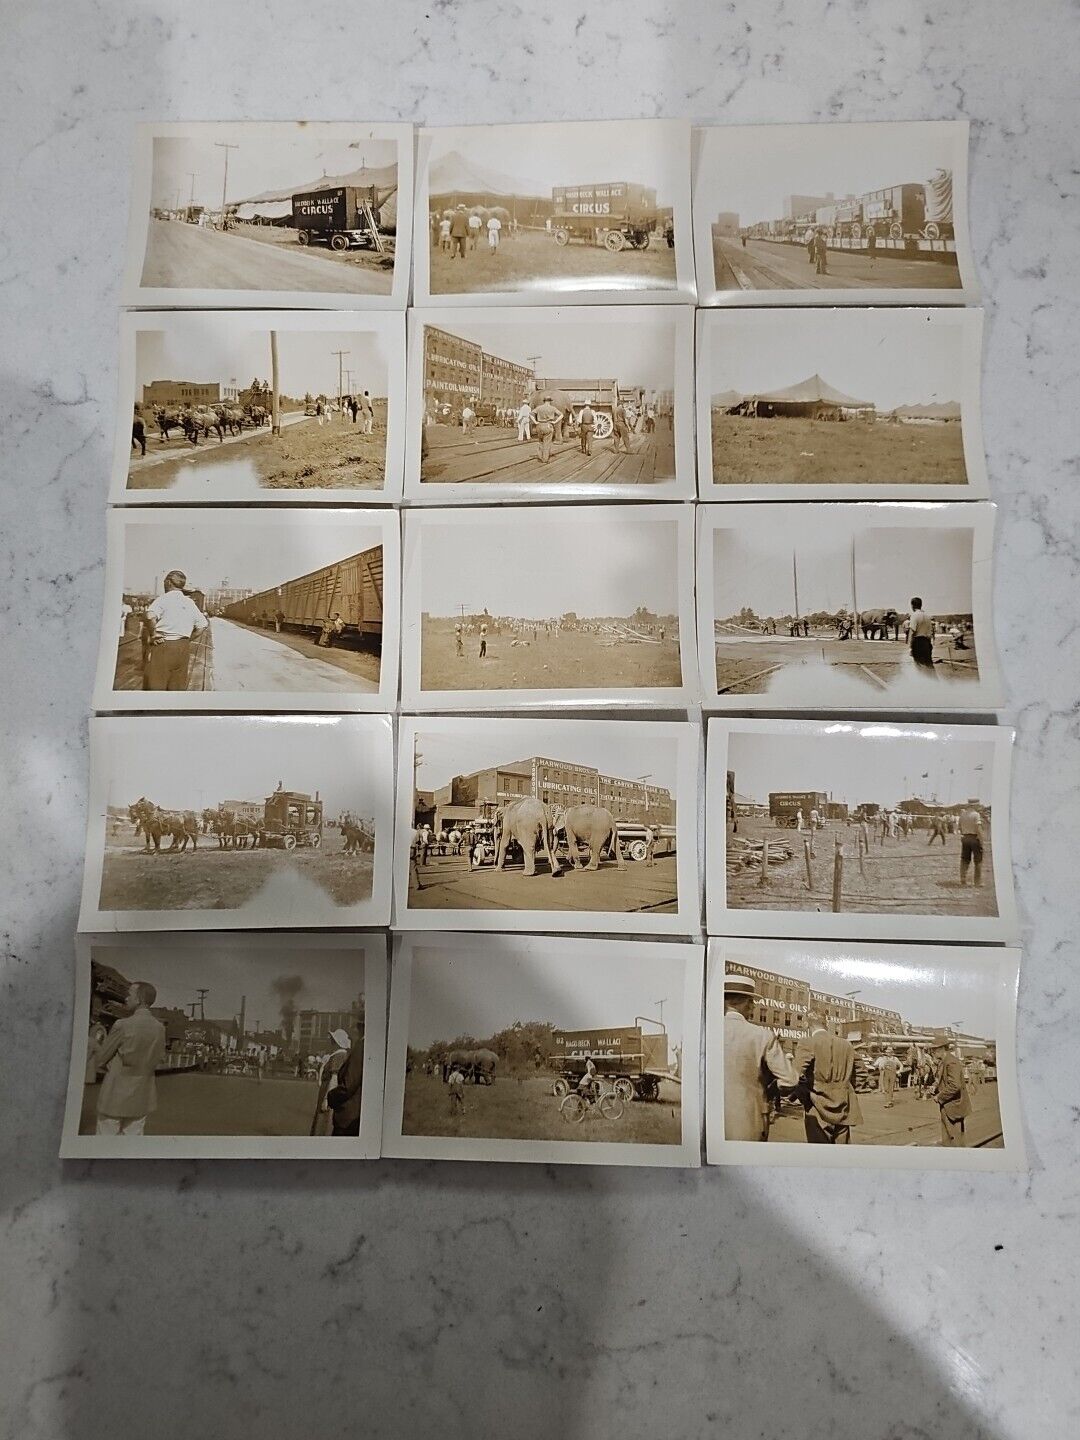 hagenbeck wallace circus photos 1937 Lot Of 15 Size 3 1/5 X 2 1/5 Inches Lot1